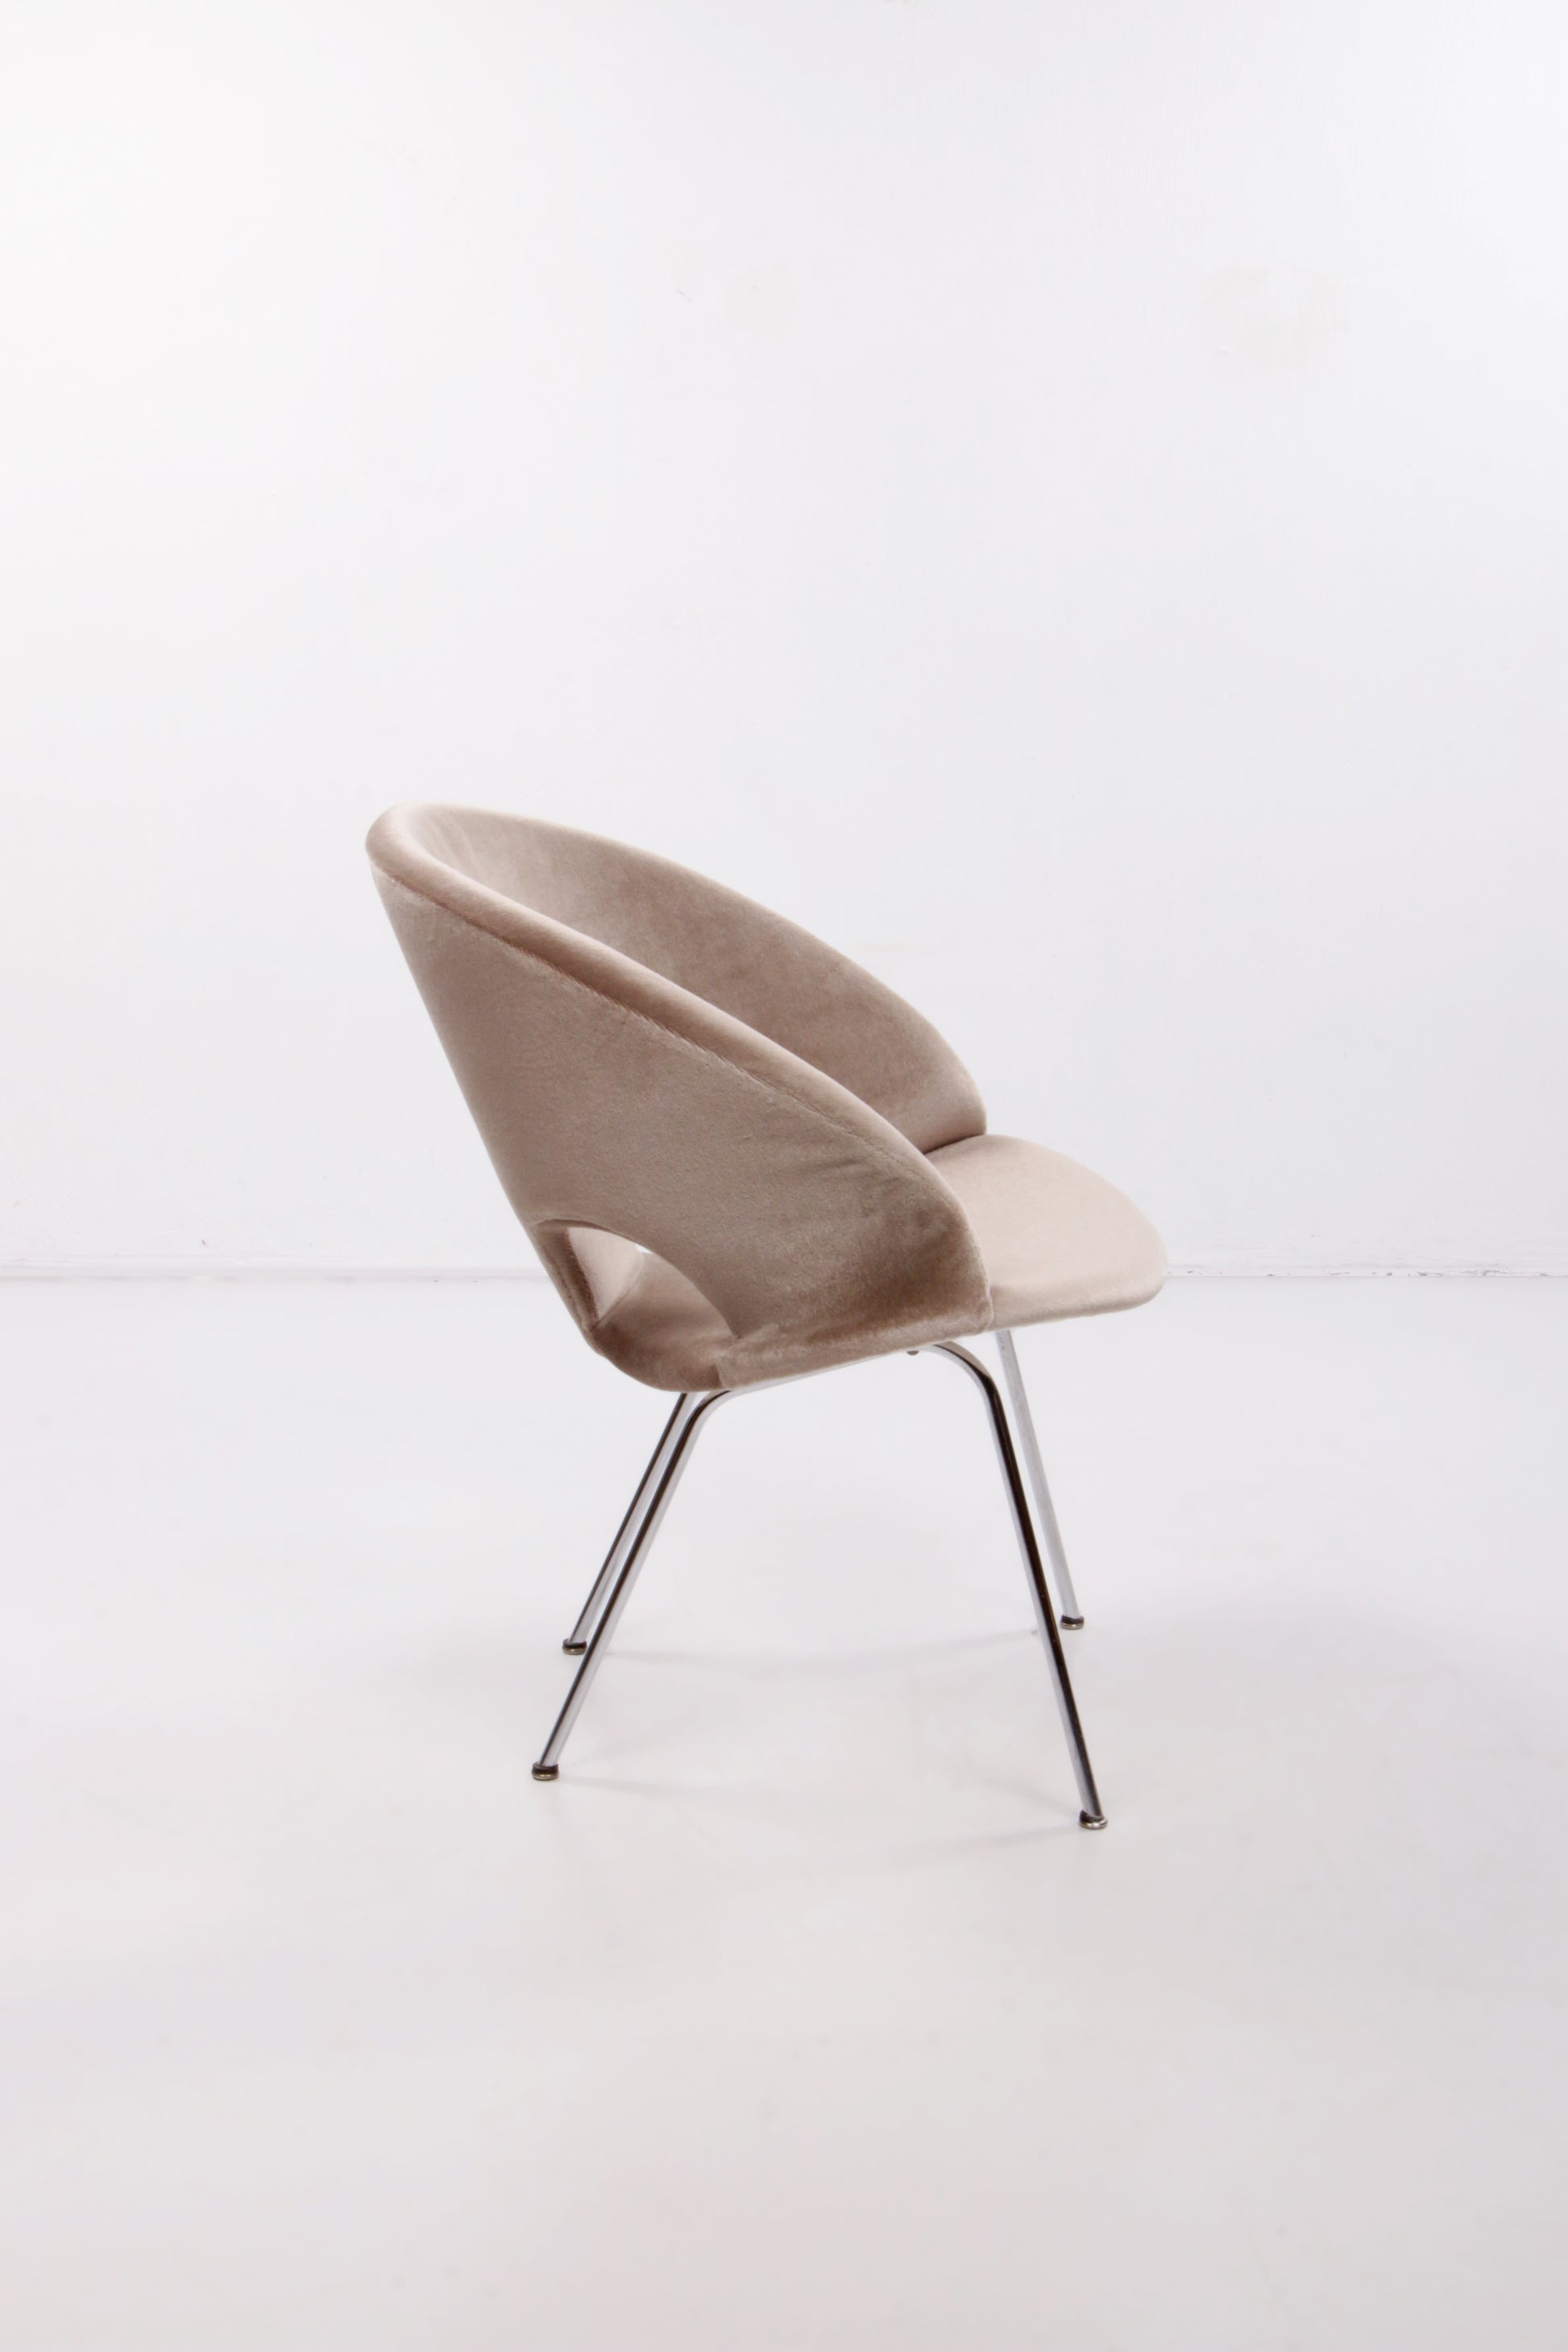 Model 350 Lounge Chair by Arno Votteler for Walter Knoll, 1950s